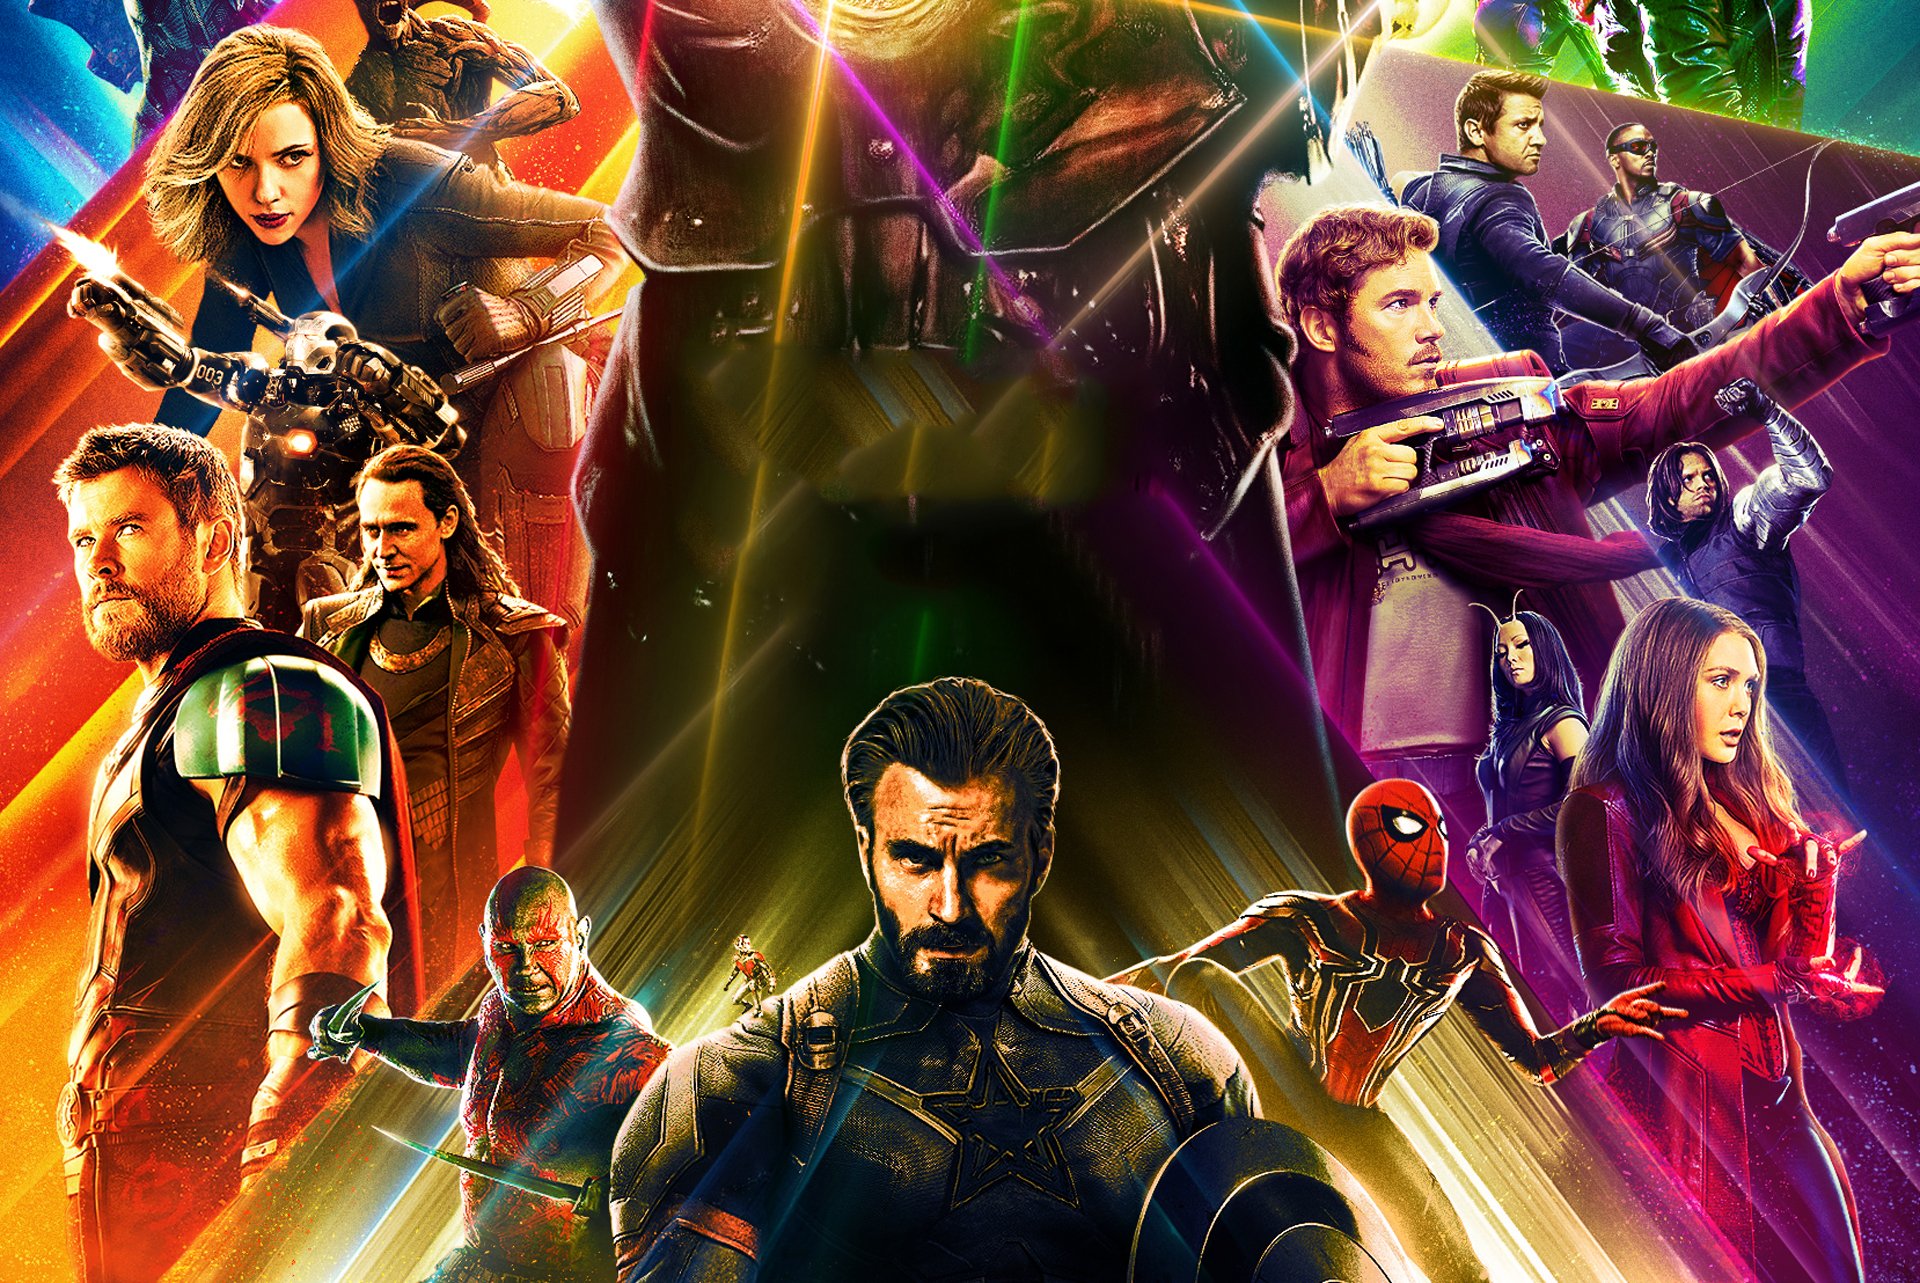 Avengers Infinity War Official Poster Wallpapers